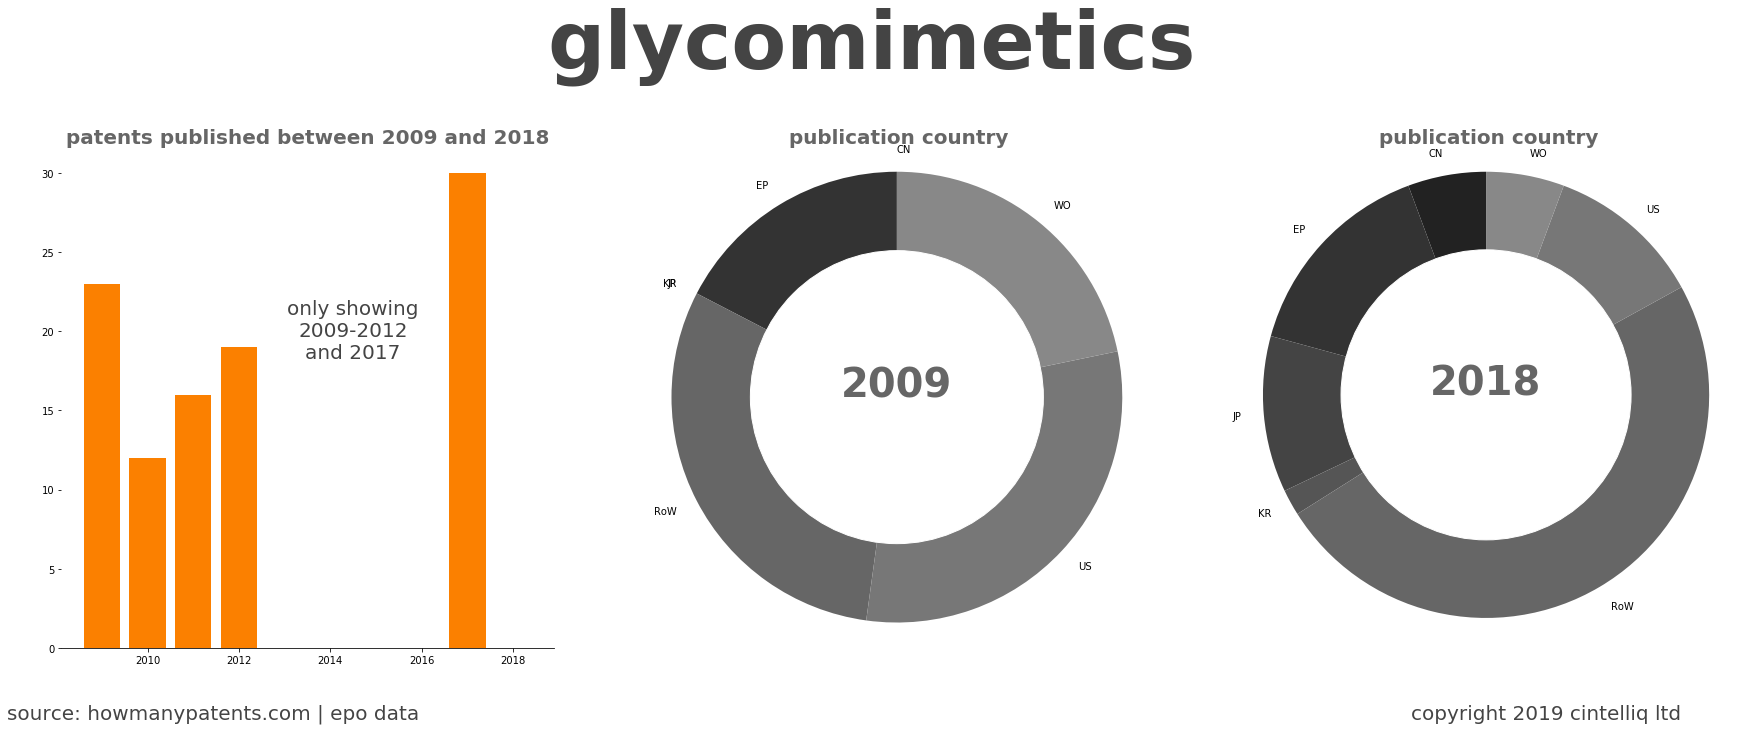 summary of patents for Glycomimetics